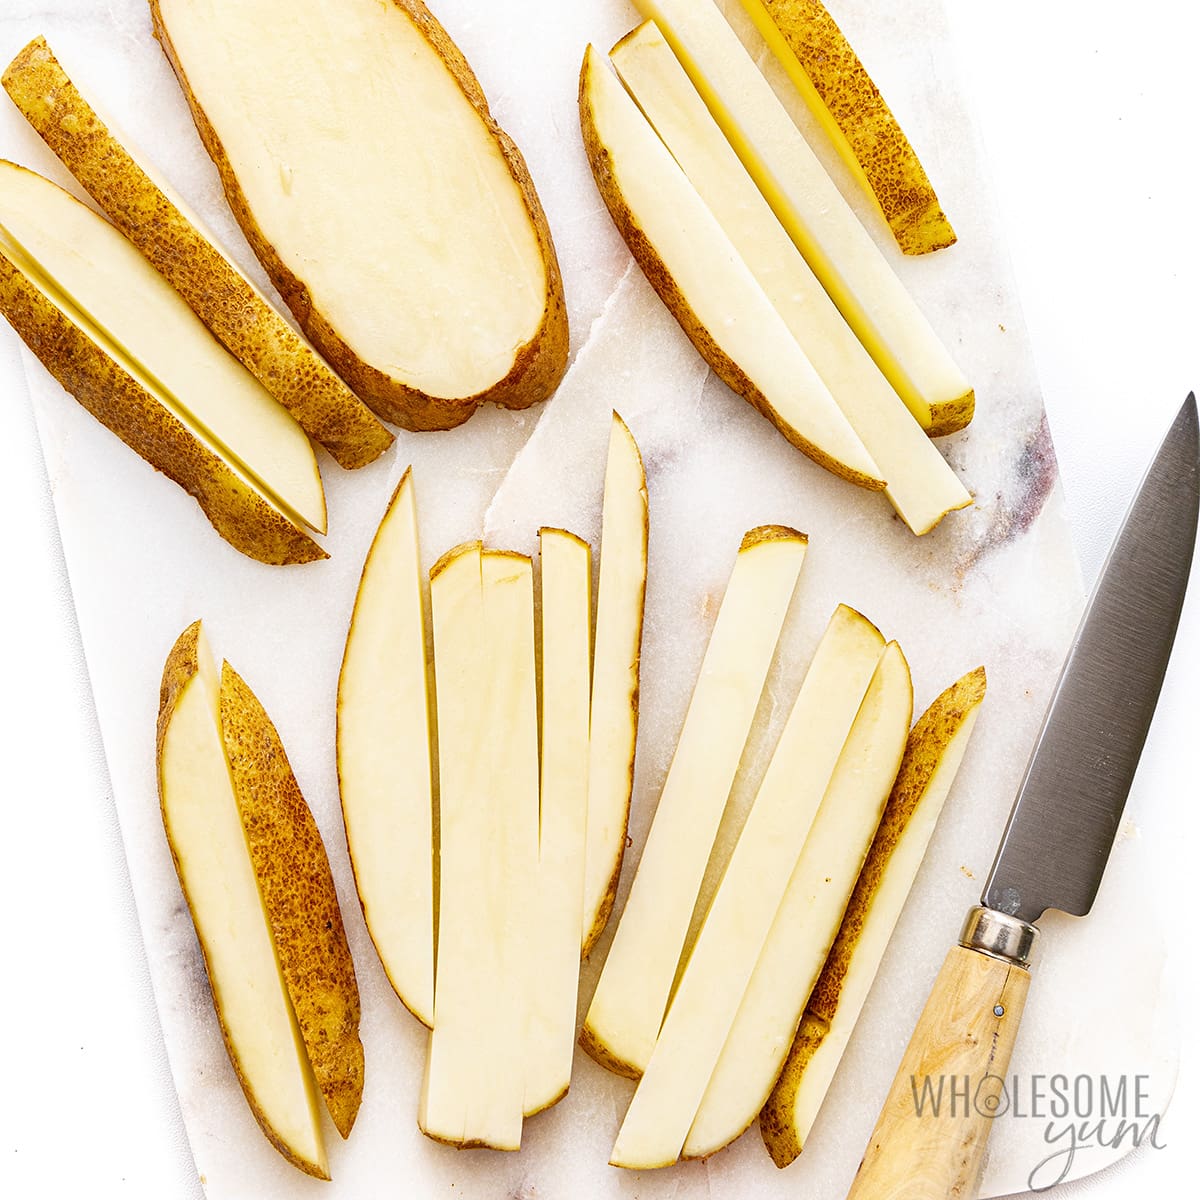 Potatoes sliced into thin strips.